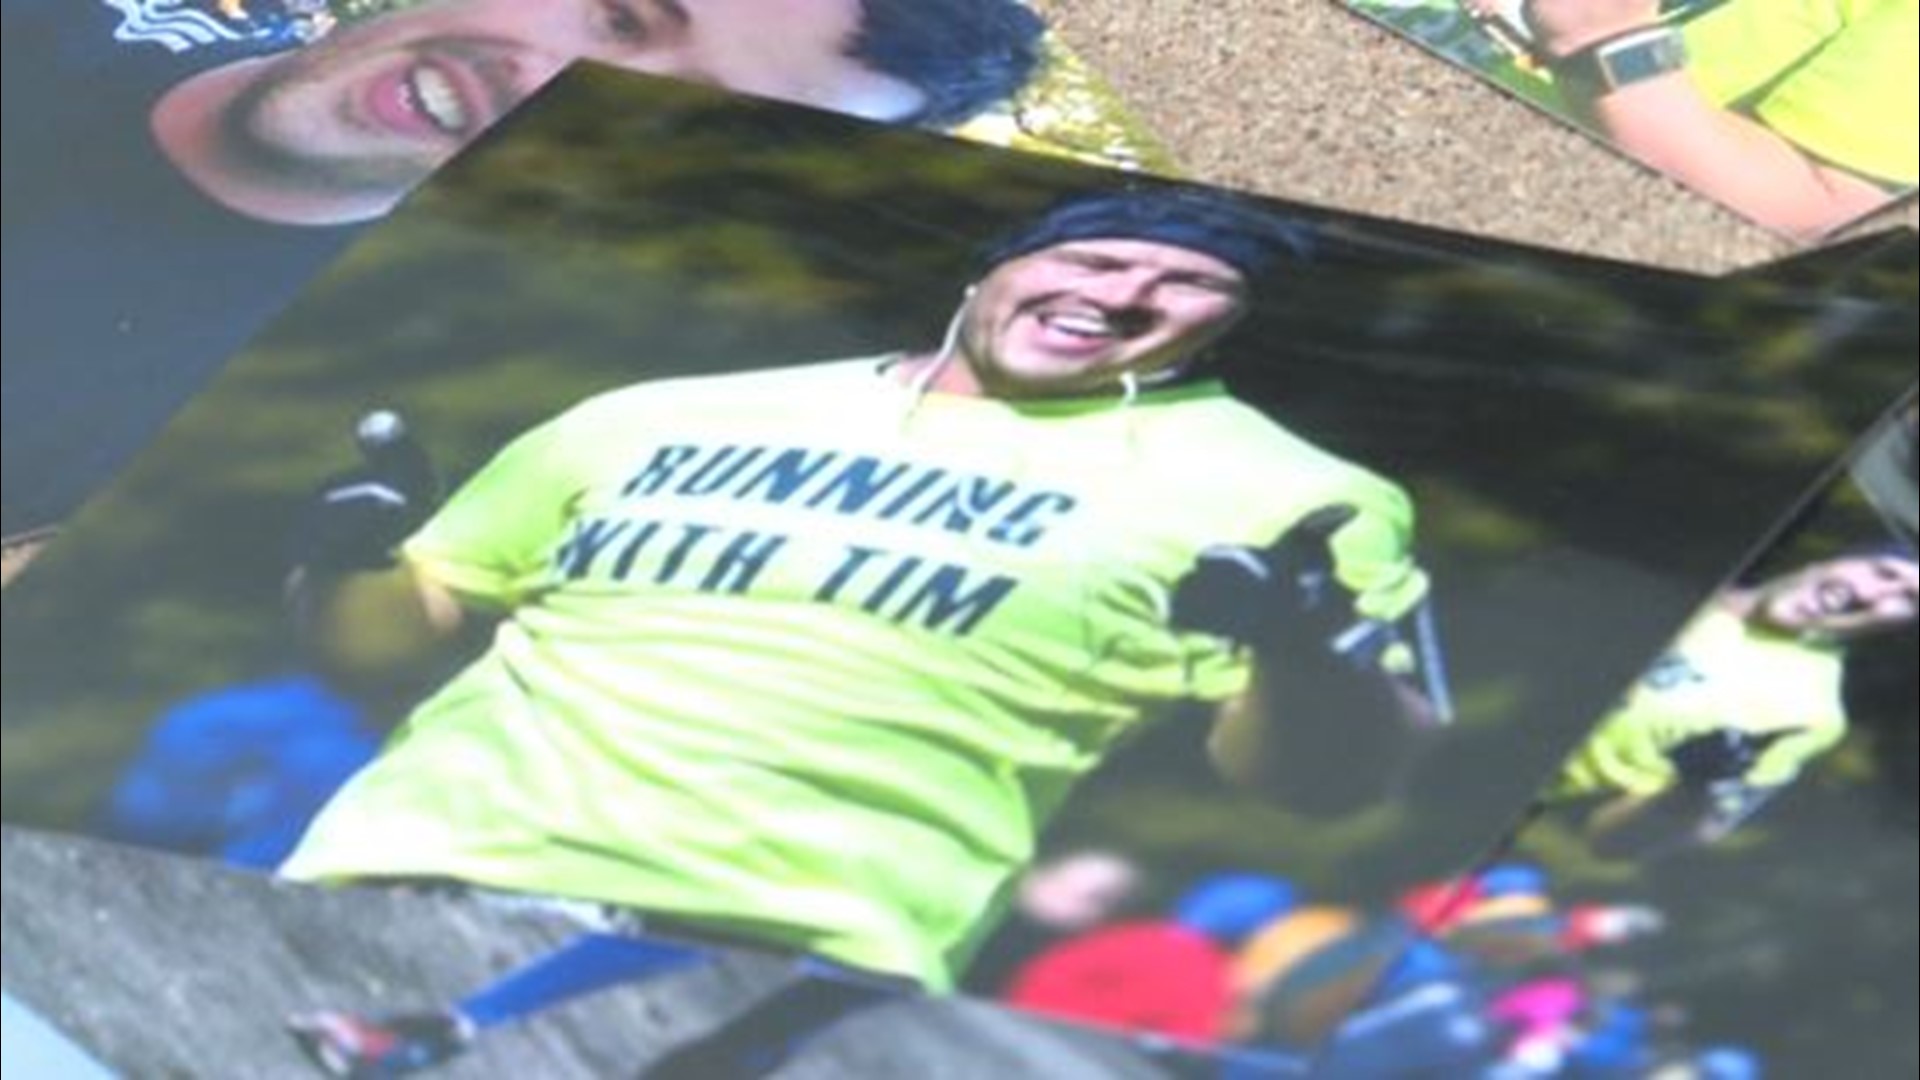 Tom Susco's eight-year journey to complete 50 half or full marathons in 50 states culminated this weekend in Denver. Susco runs to honor his late brother Tim.